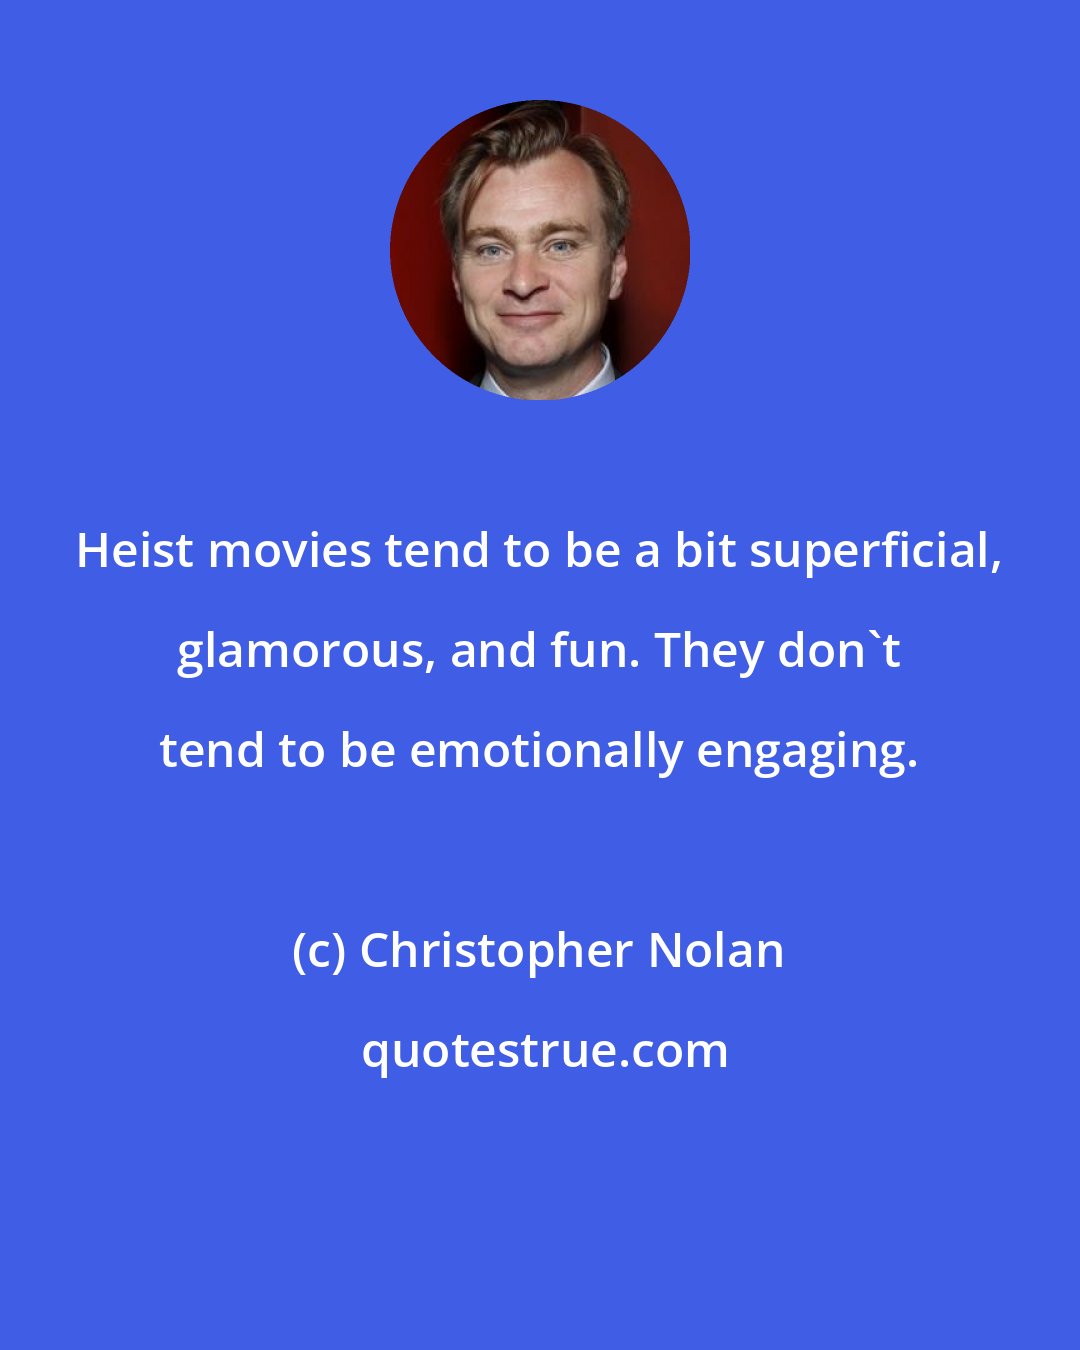 Christopher Nolan: Heist movies tend to be a bit superficial, glamorous, and fun. They don't tend to be emotionally engaging.